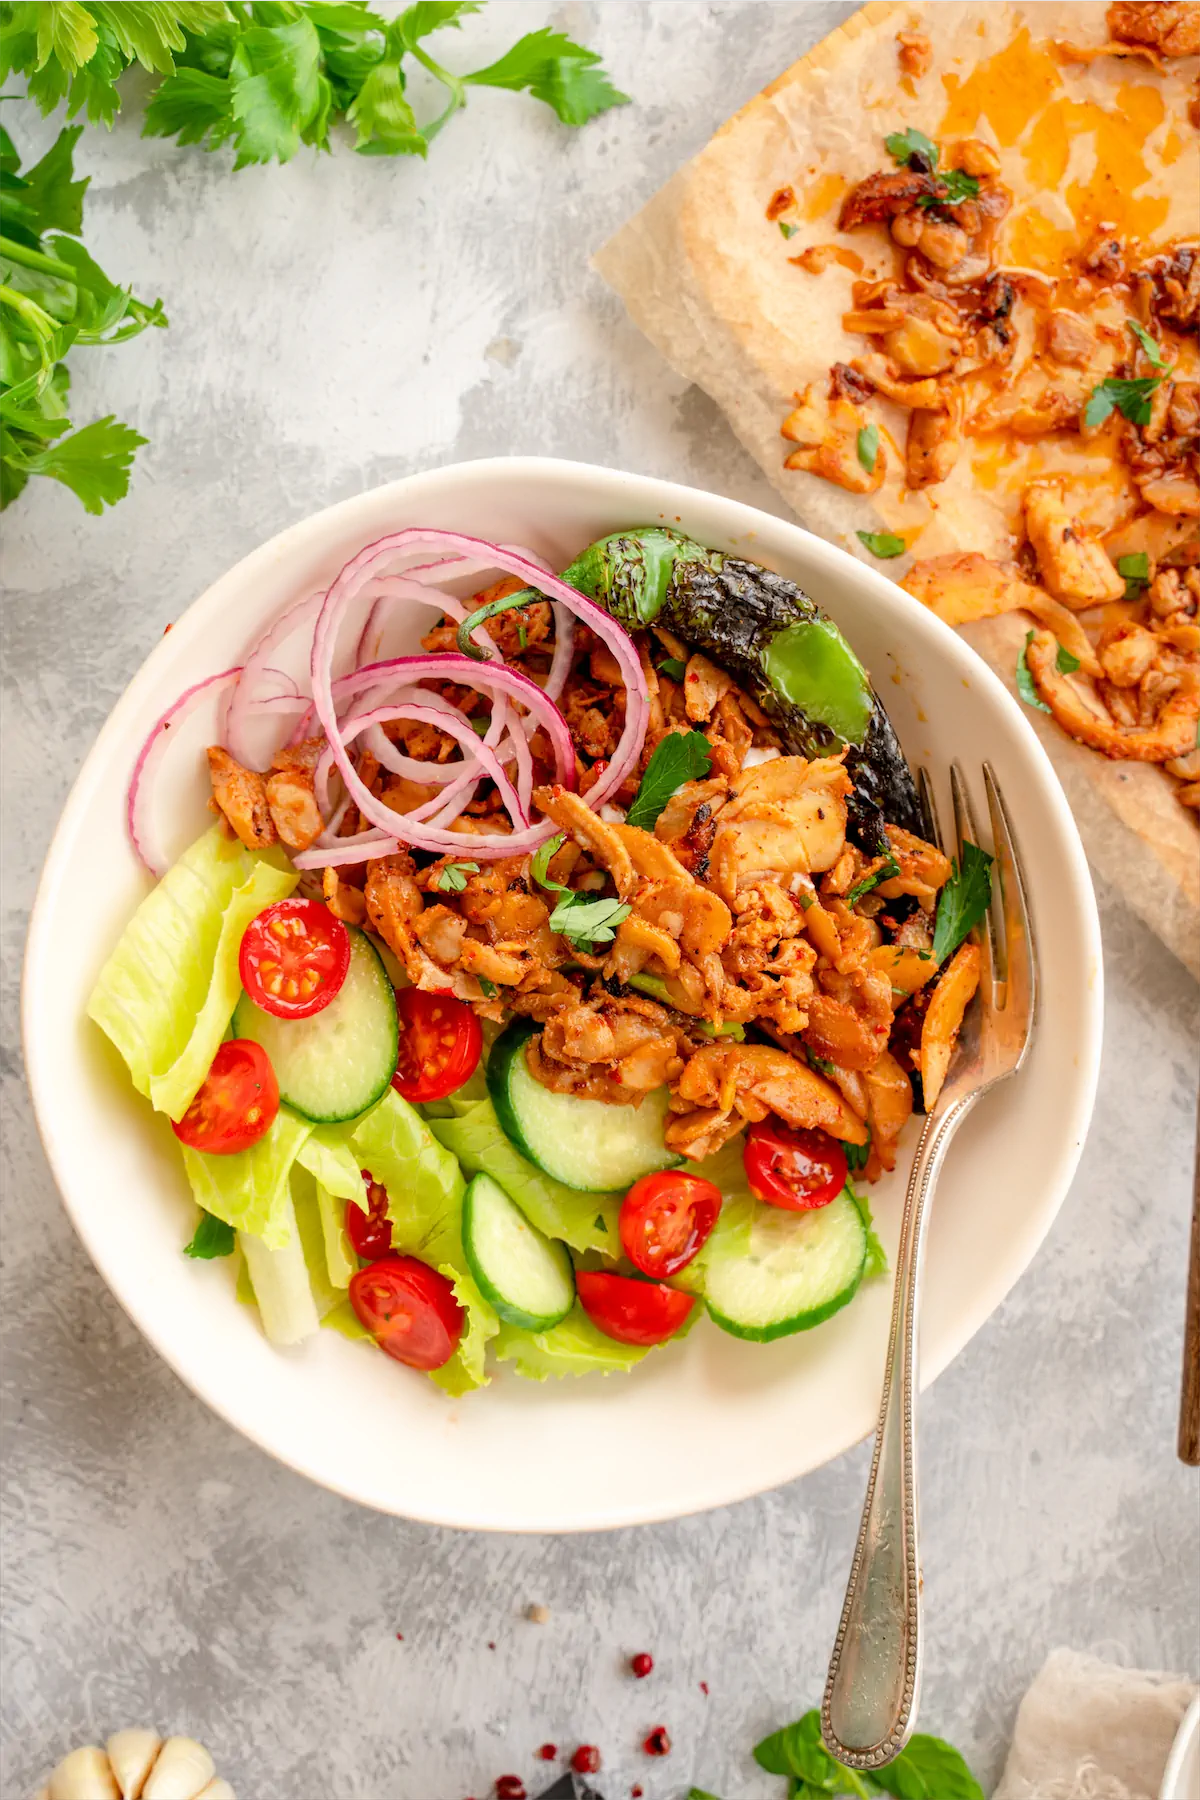 Chicken shawarma served with sliced cucumbers and cherry tomatoes in a bowl.